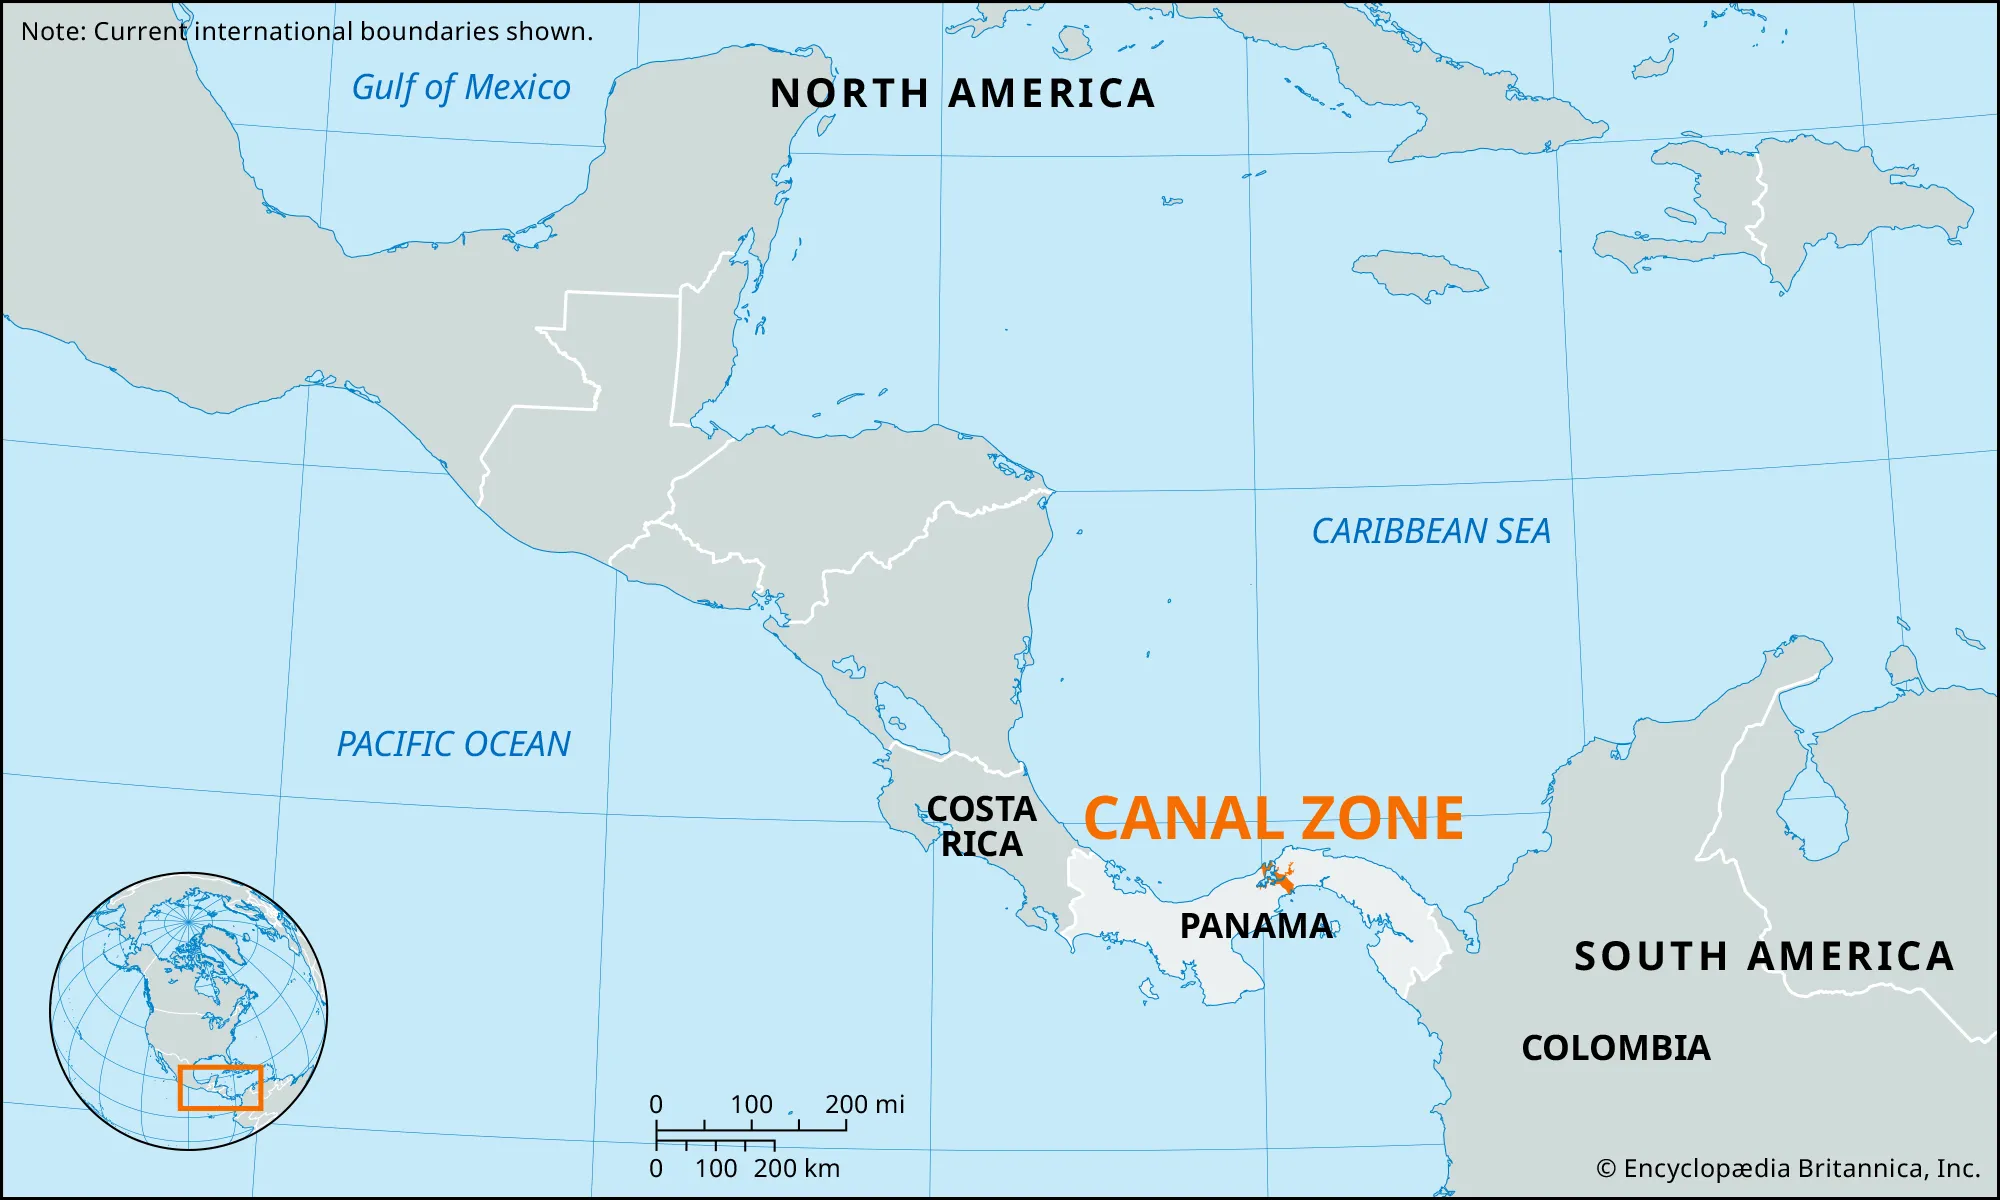 Panama Canal Widens Passage Opportunities for Maritime Trade. (Photo Internet reproduction)